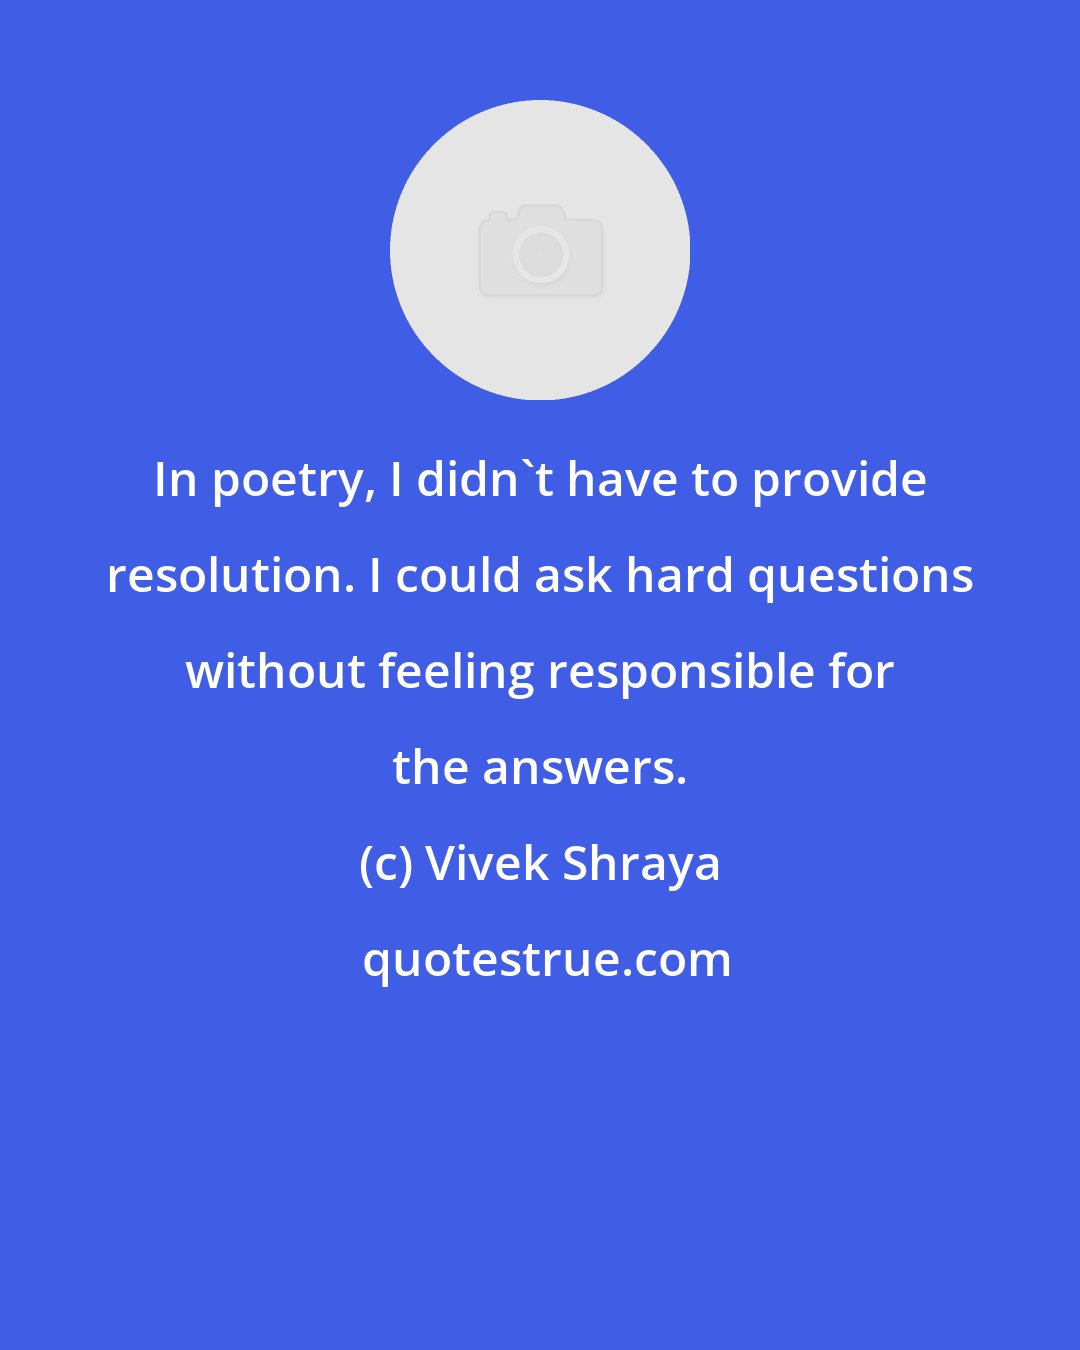 Vivek Shraya: In poetry, I didn't have to provide resolution. I could ask hard questions without feeling responsible for the answers.